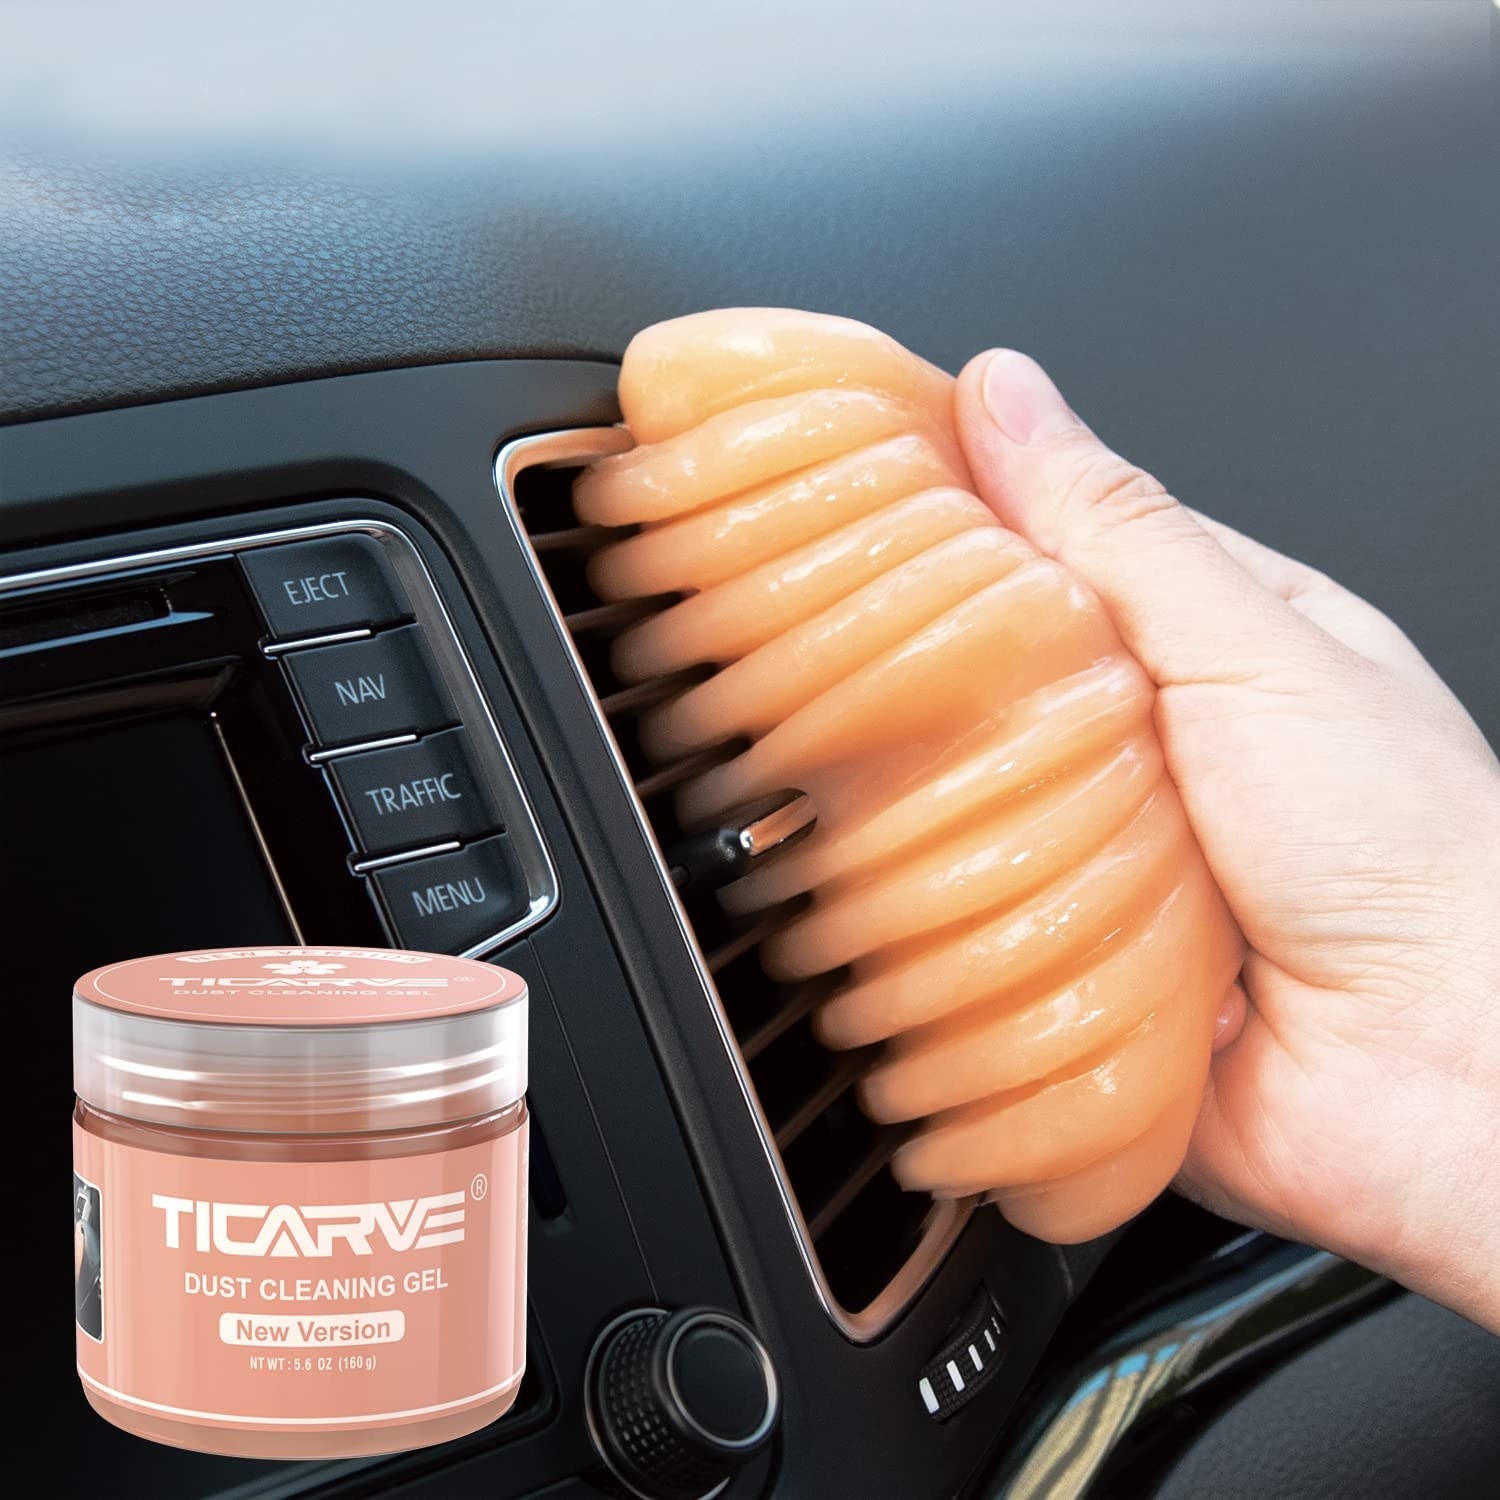 the cleaning putty being used to clean a car vent